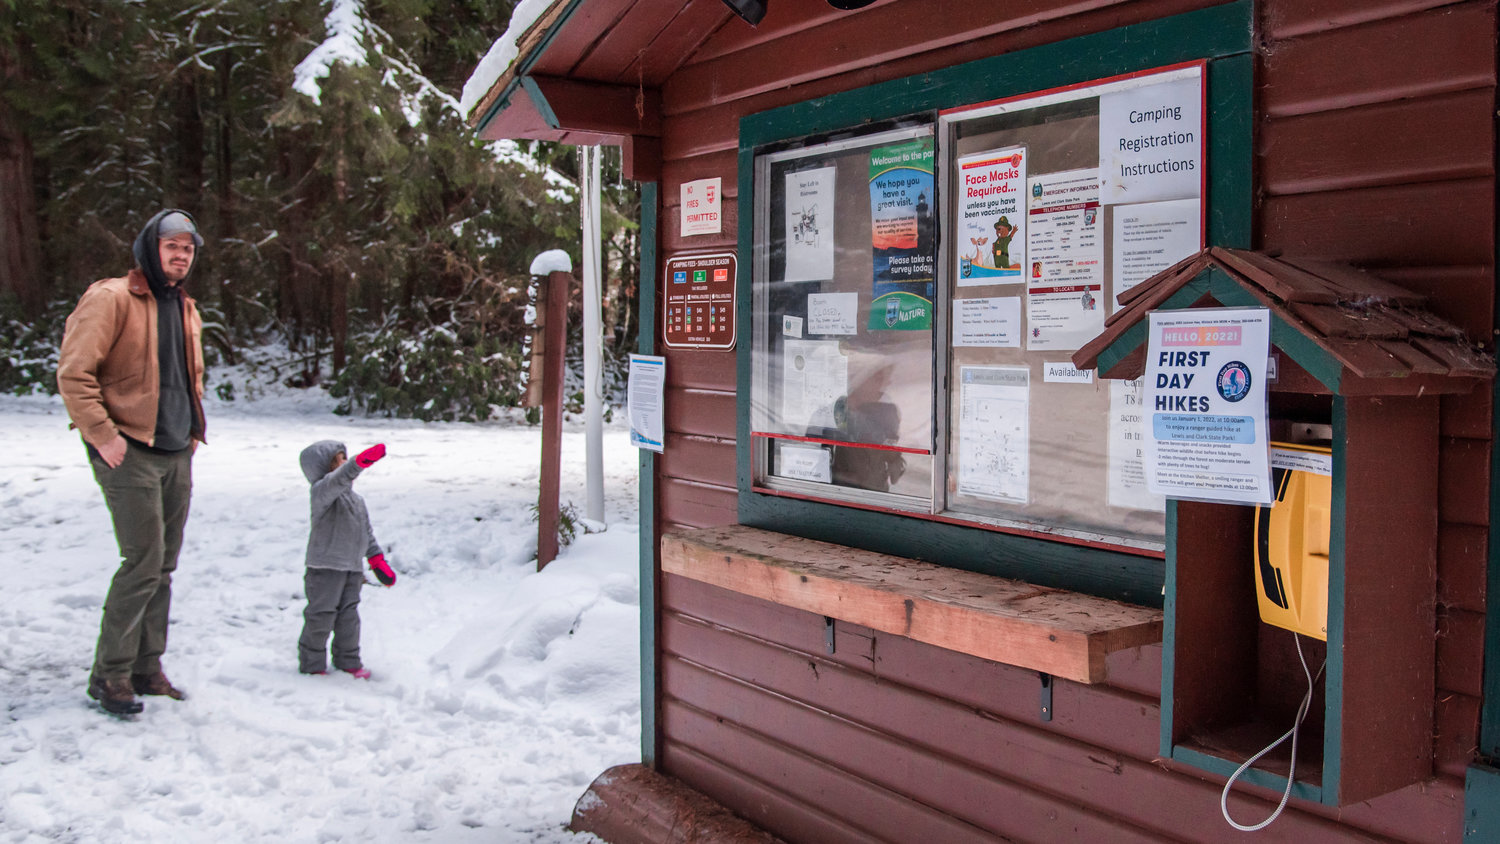 Lucy Wade, 4, points out signs on a building during a visit to Lewis and Clark State Park with her family on Saturday.